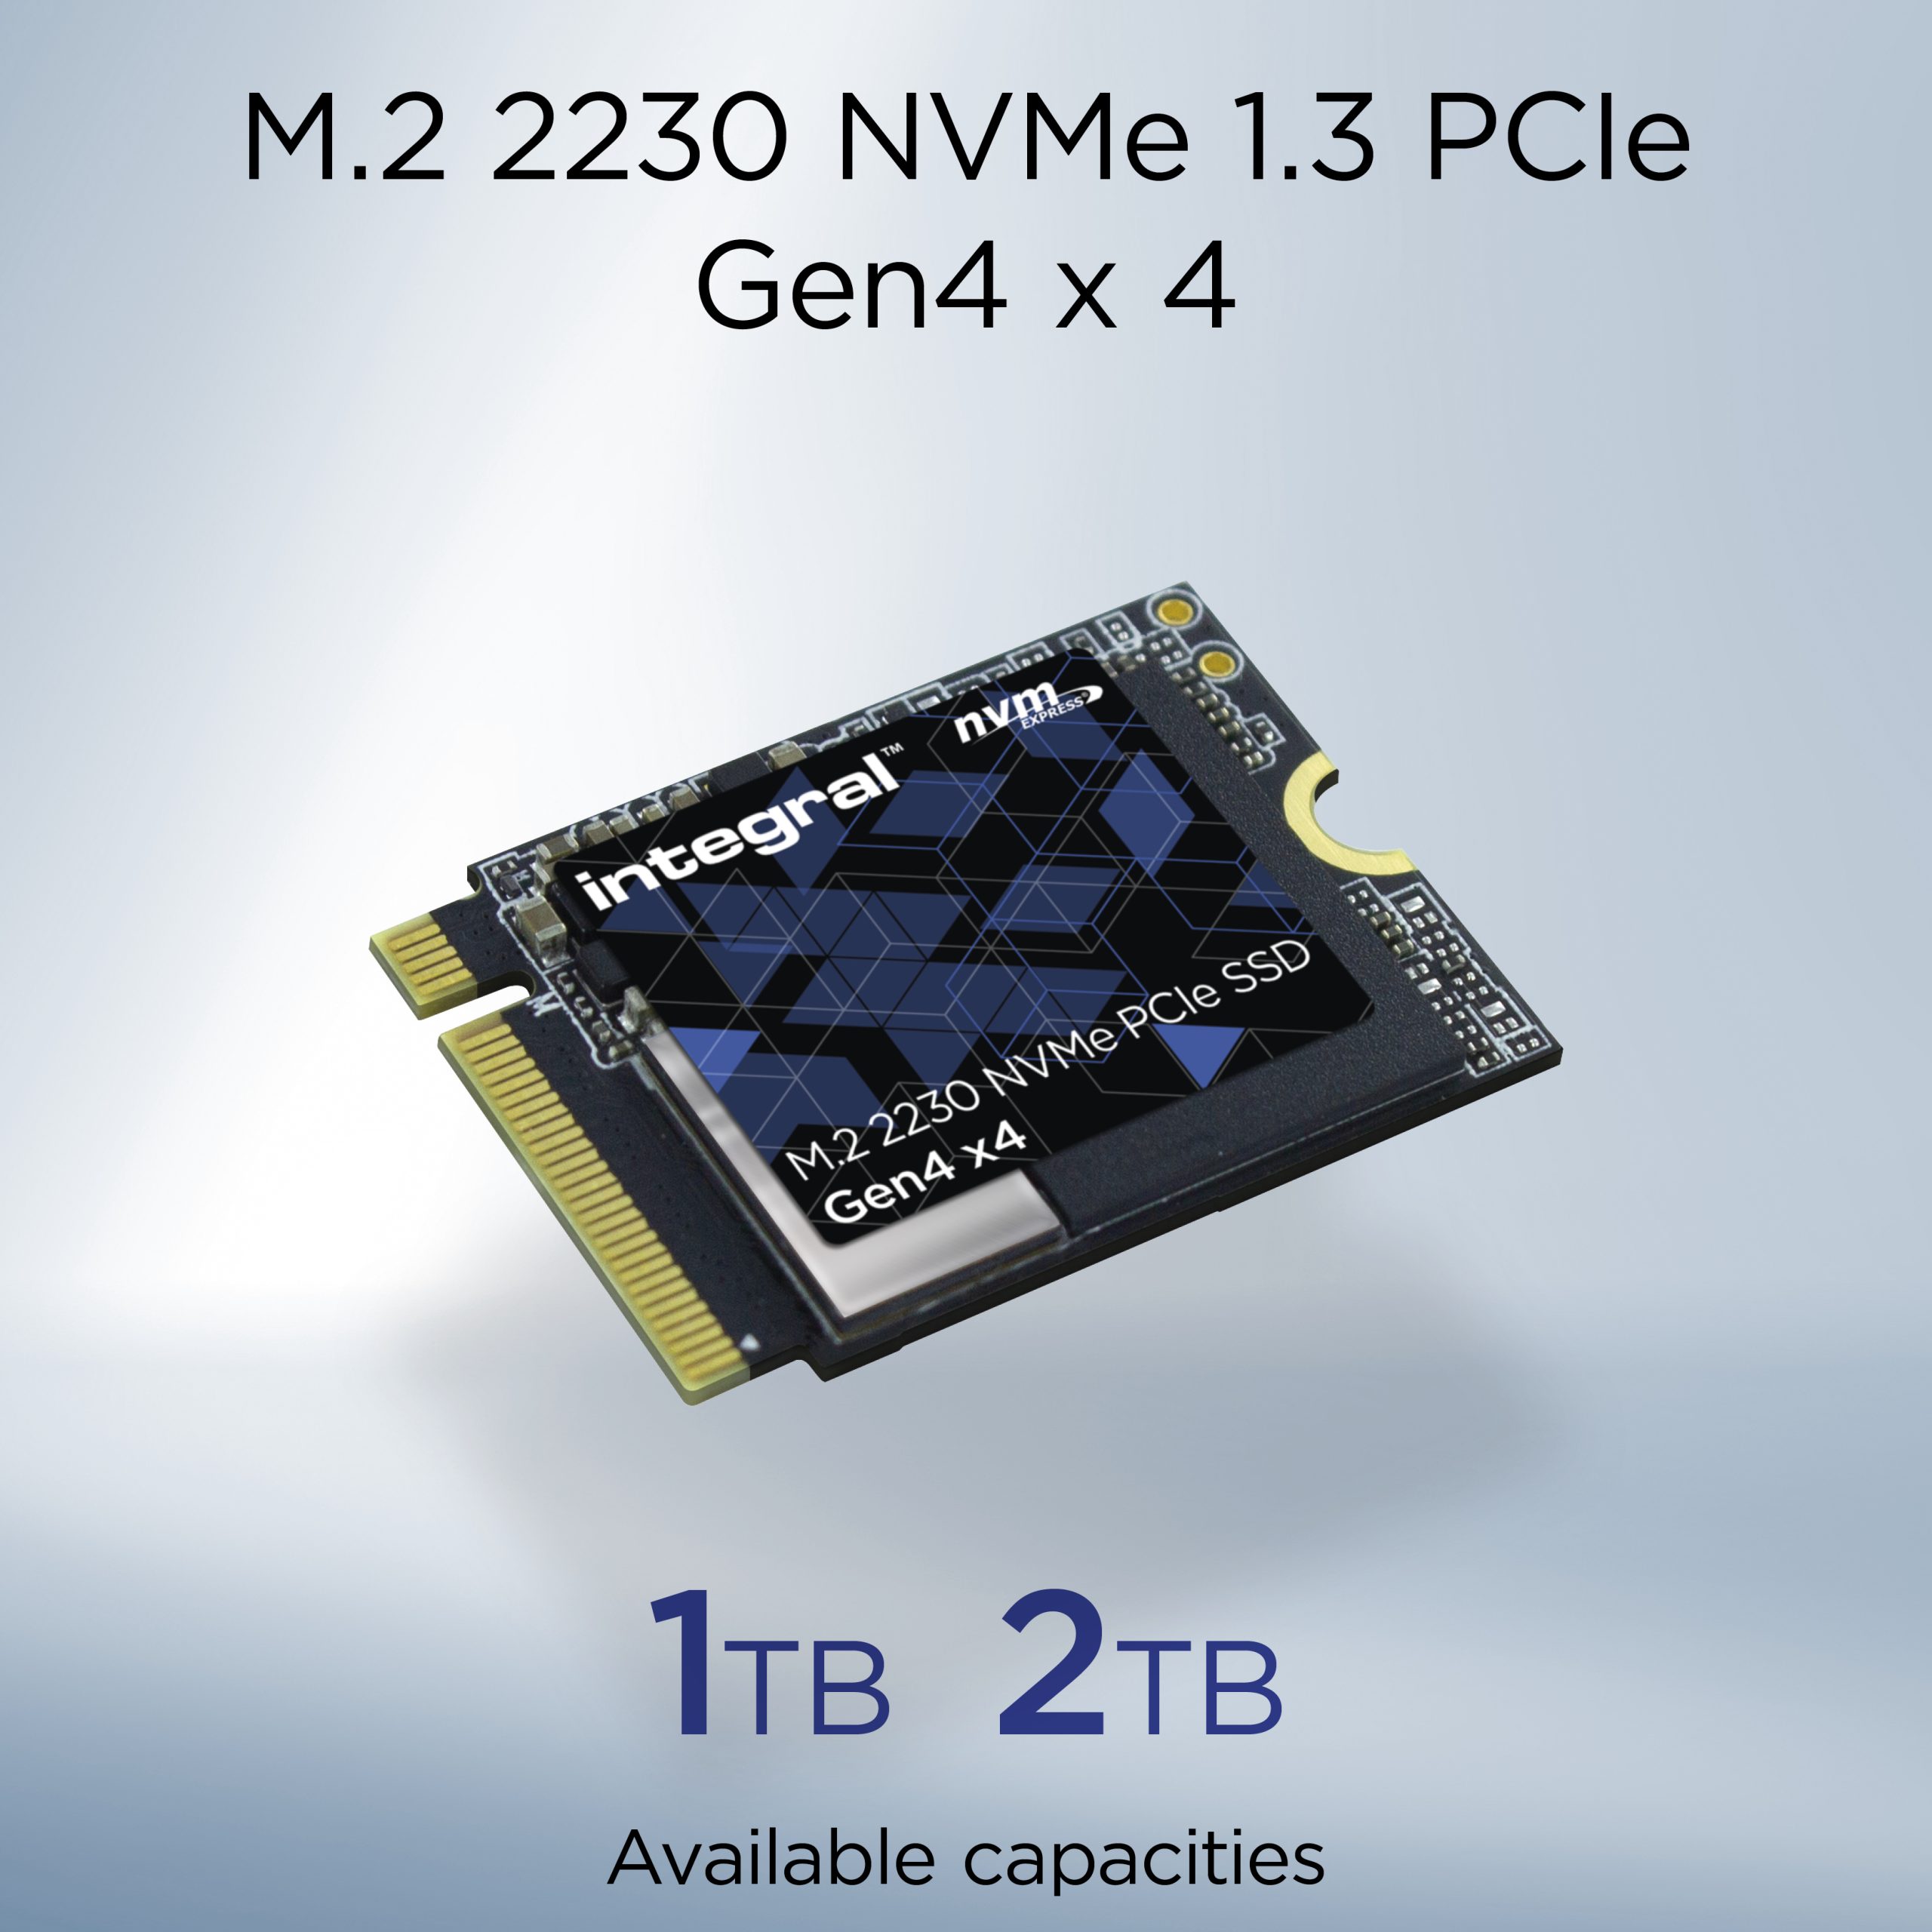 Capacities for M.2 2230 NVMe SSD Gen4 1TB and 2TB